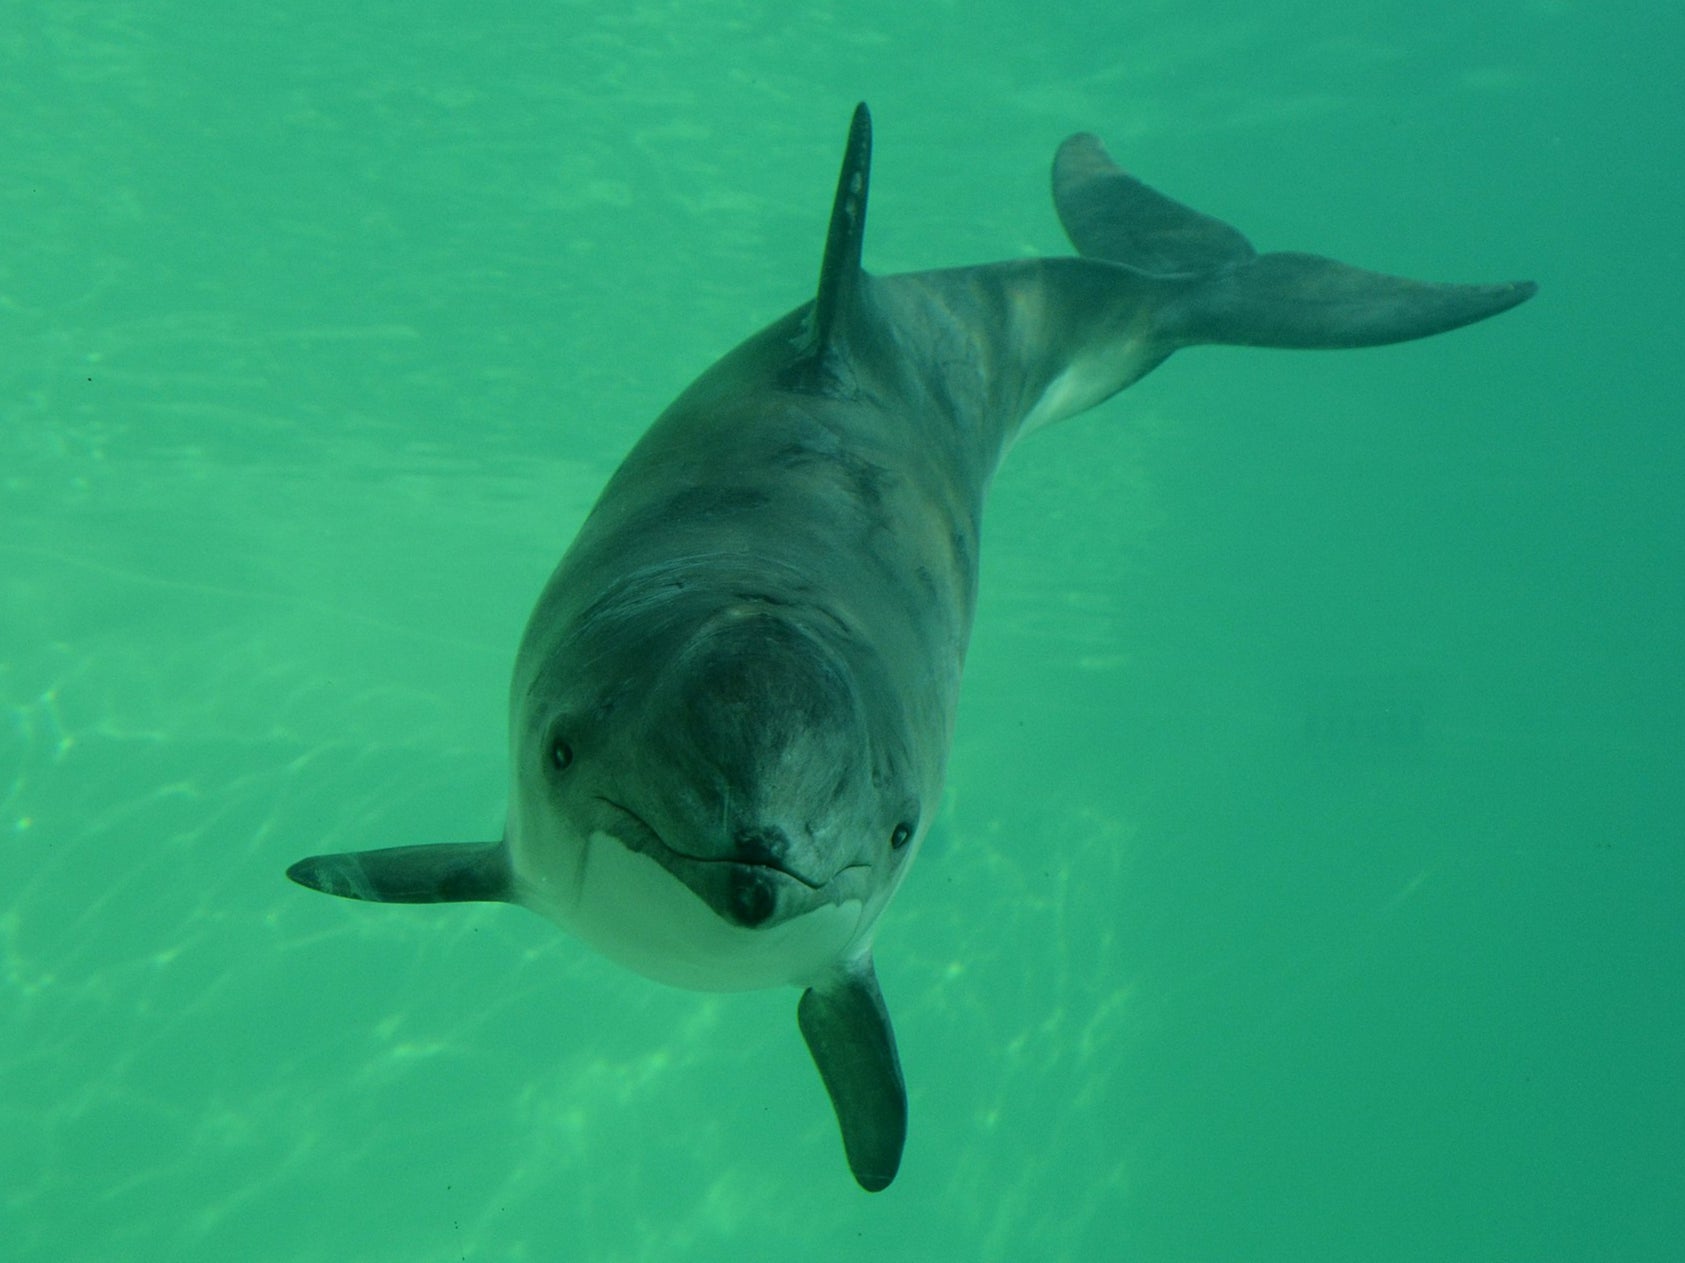 Harbour porpoises are common in the North Sea, but numbers are falling in waters around Germany, worrying scientists